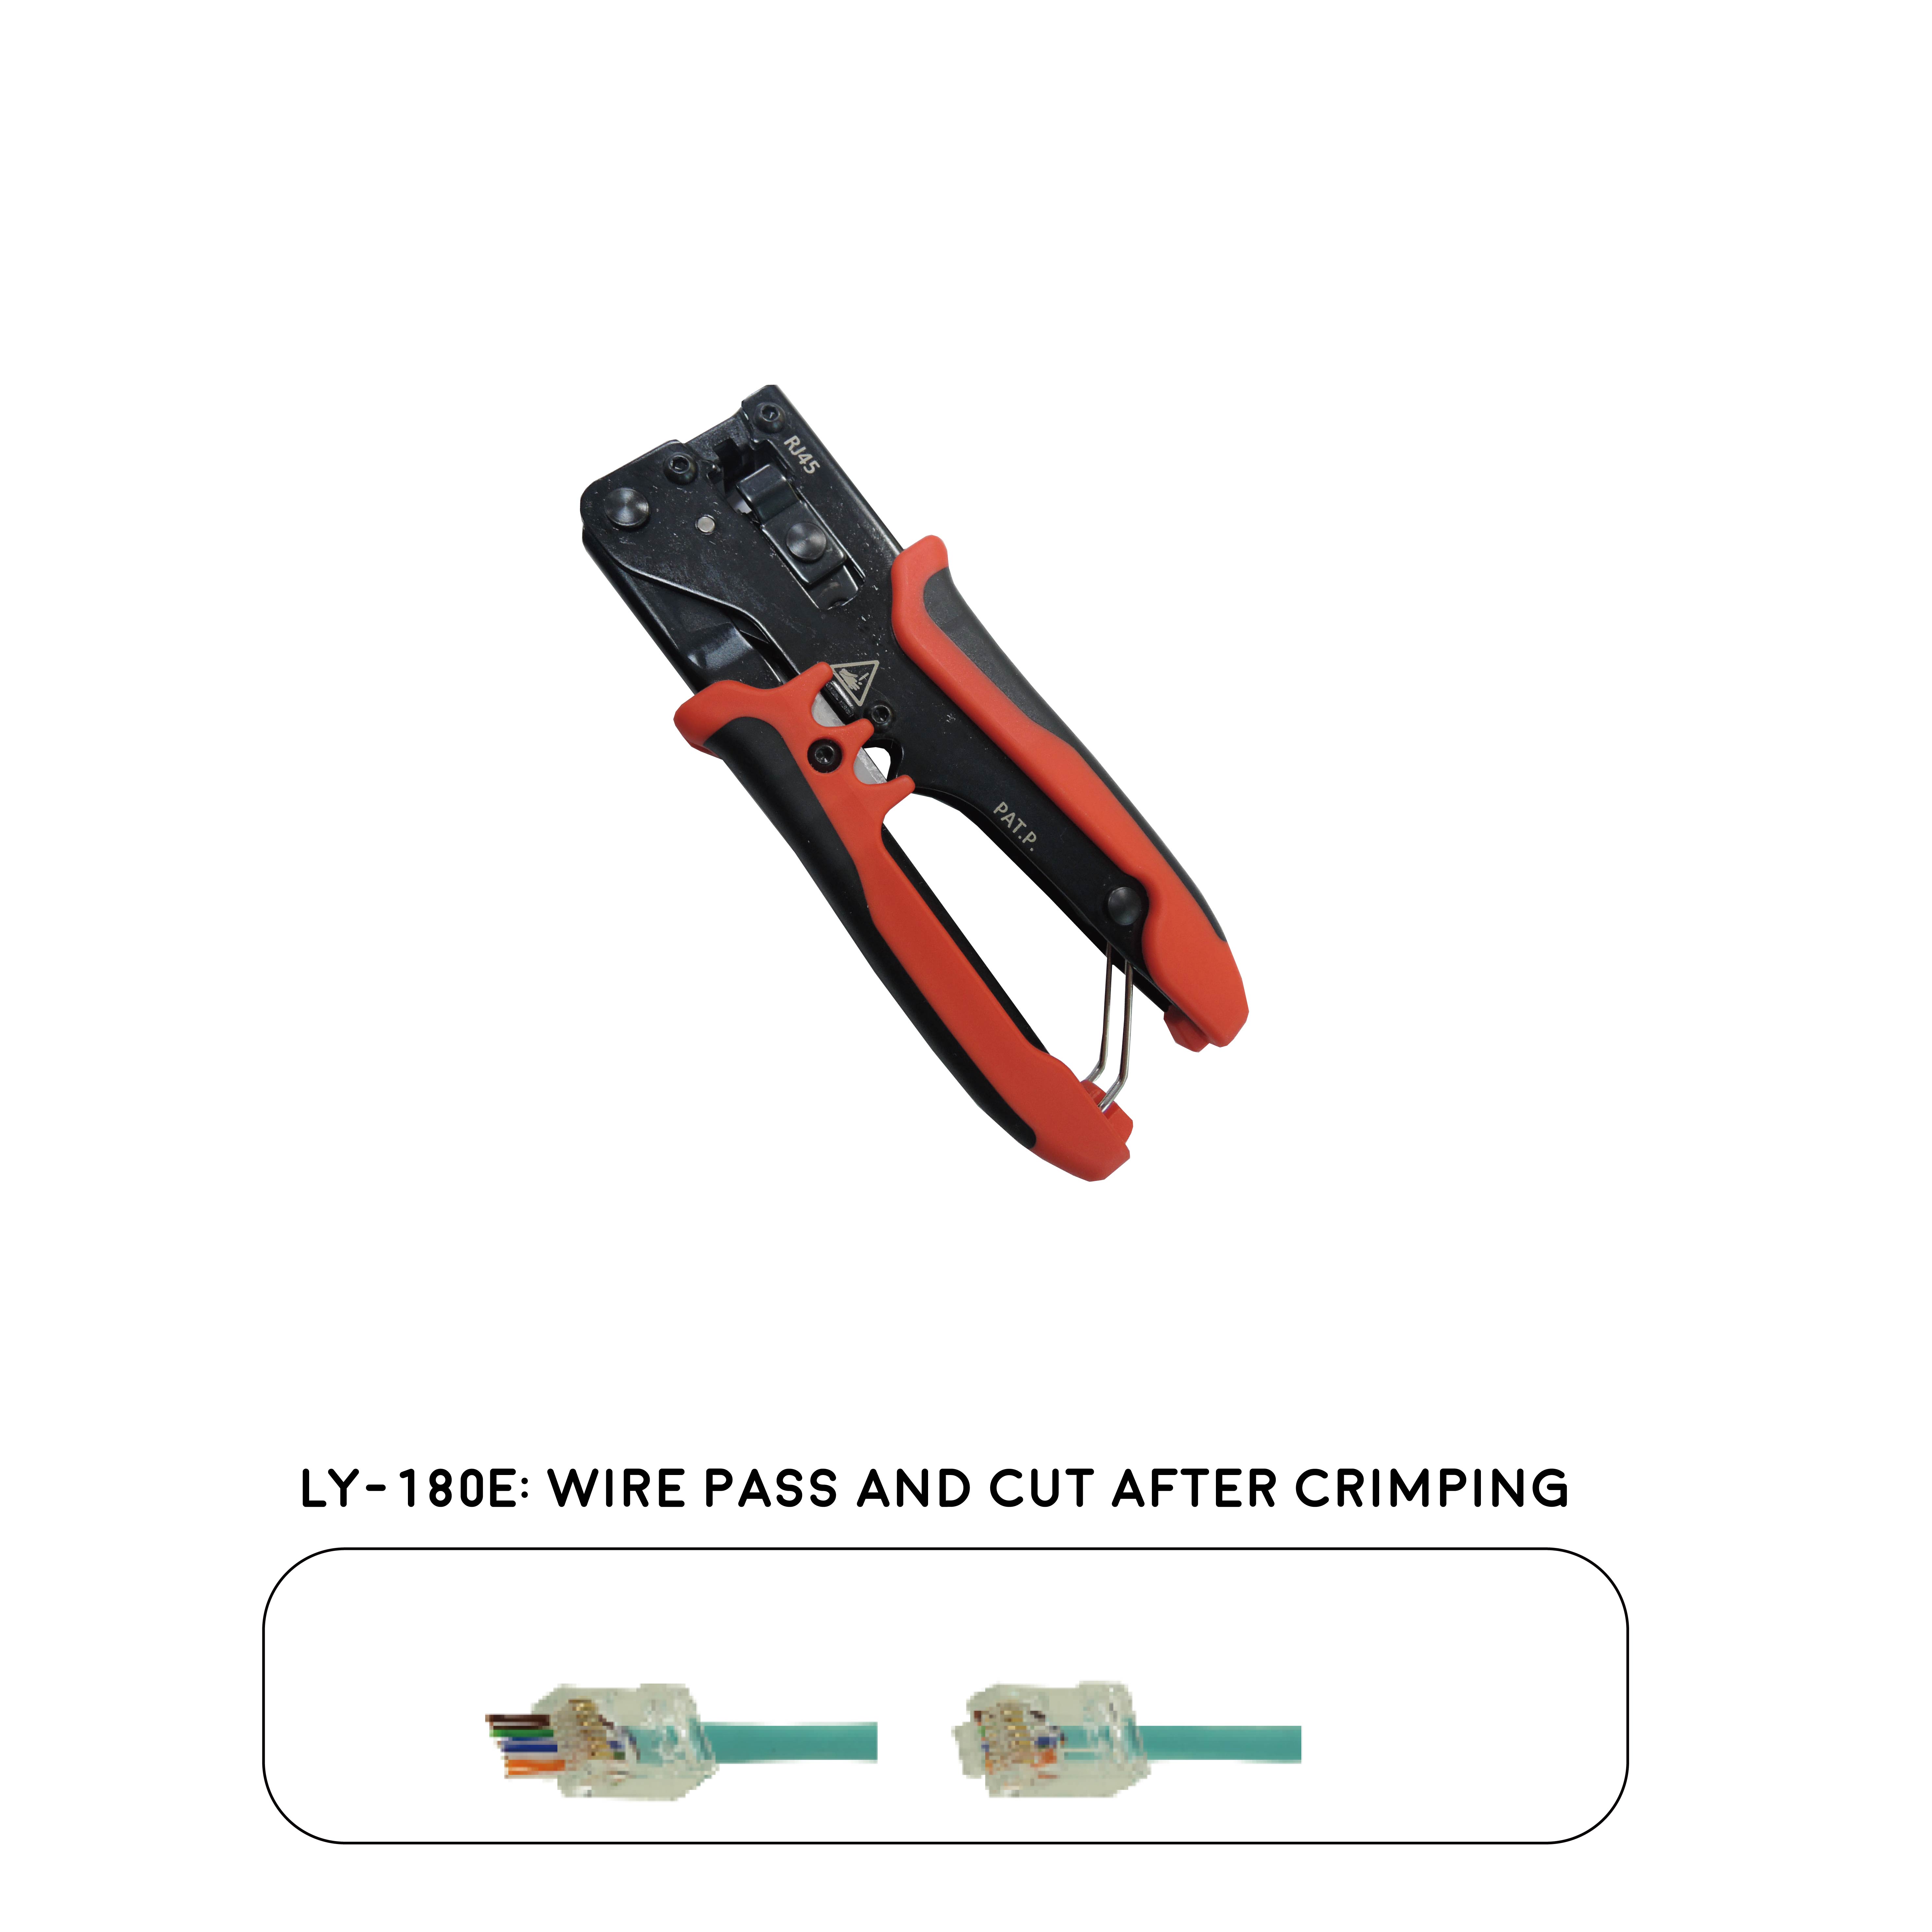 LY-180A, LY-180E HAND CRIMPING TOOLS